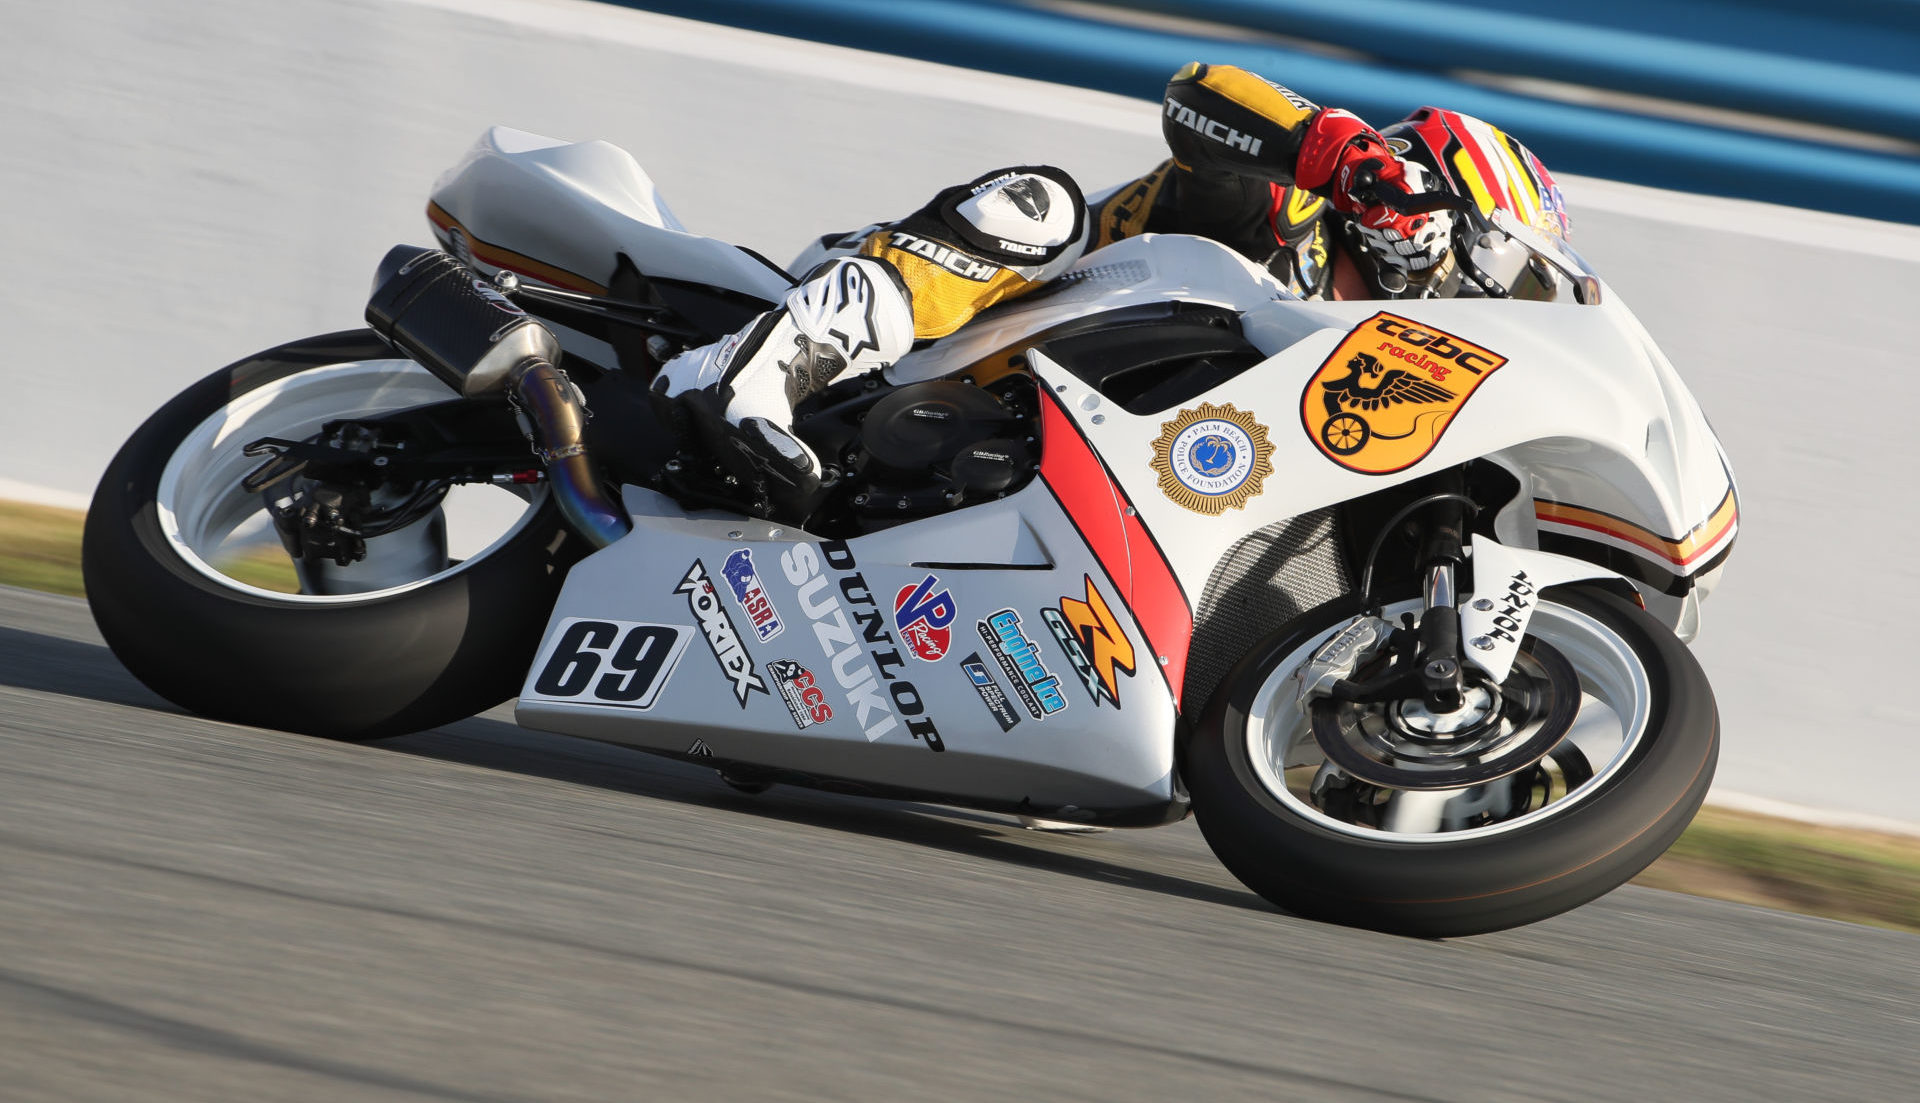 Danny Eslick (69) at speed on the TOBC Racing Suzuki GSX-R600. Photo by Brian J. Nelson, courtesy TOBC Racing.